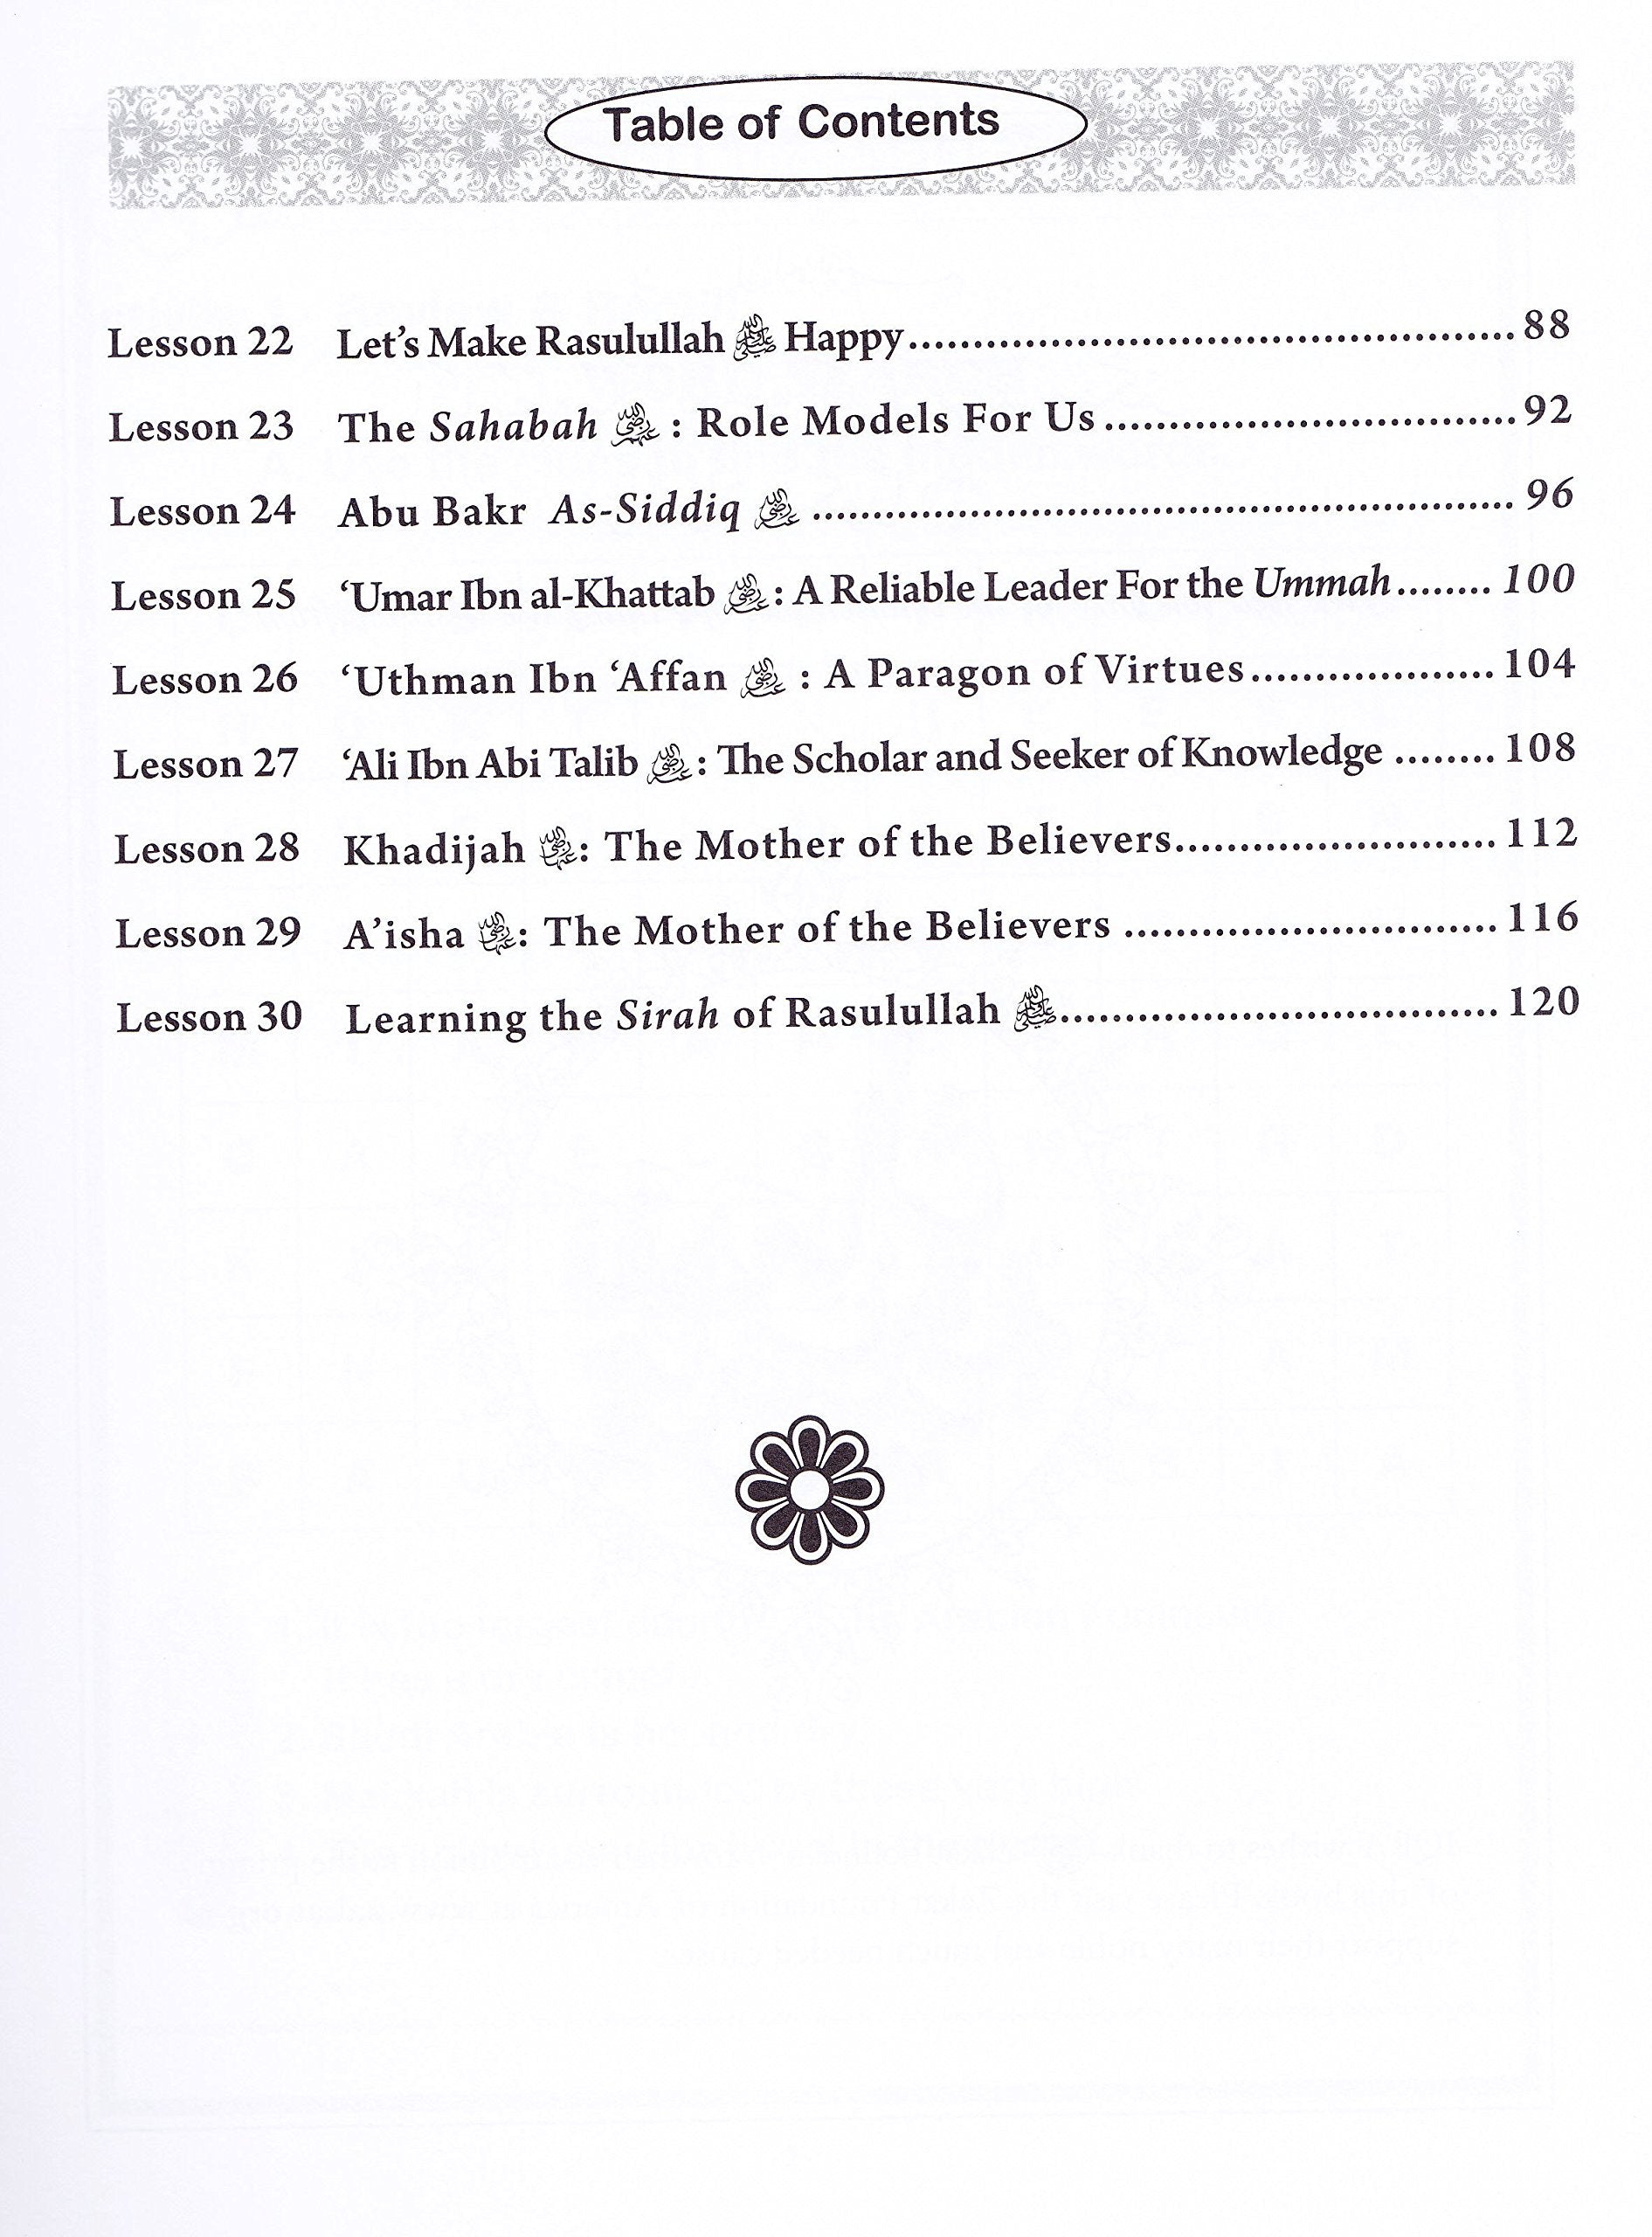 table of contents the prophet